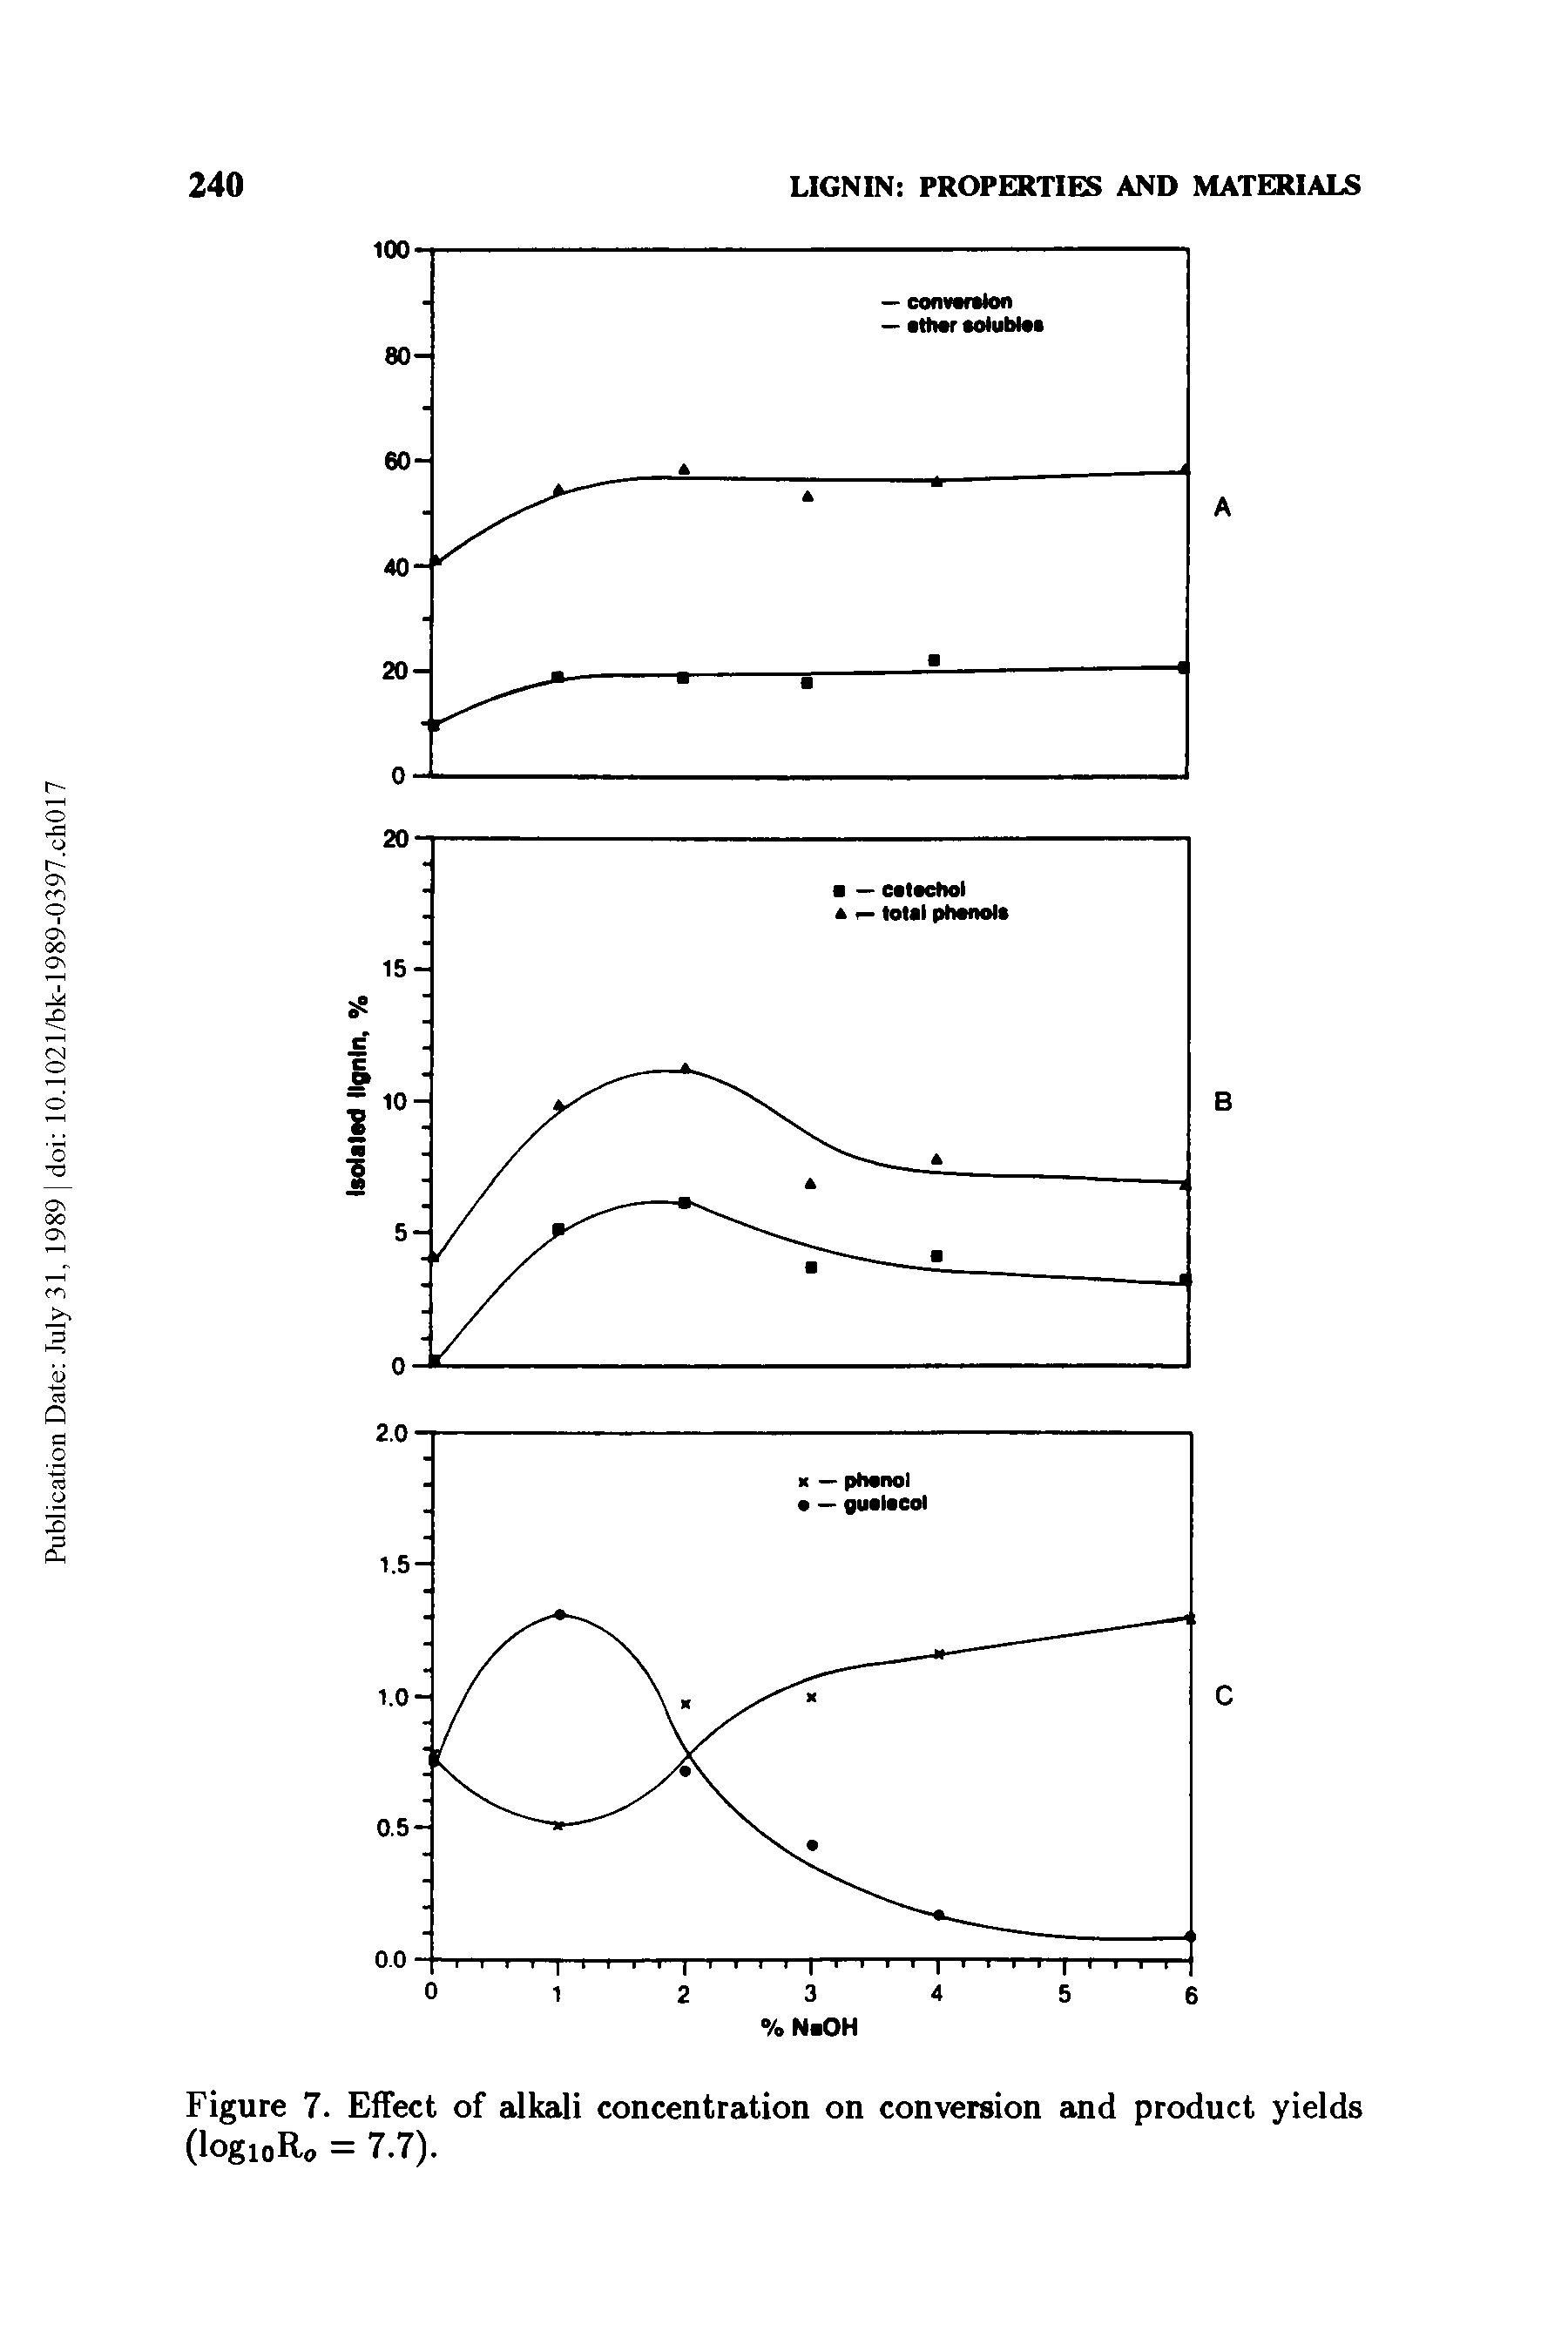 Figure 7. Effect of alkali concentration on conversion and product yields (logioR0 = 7.7).